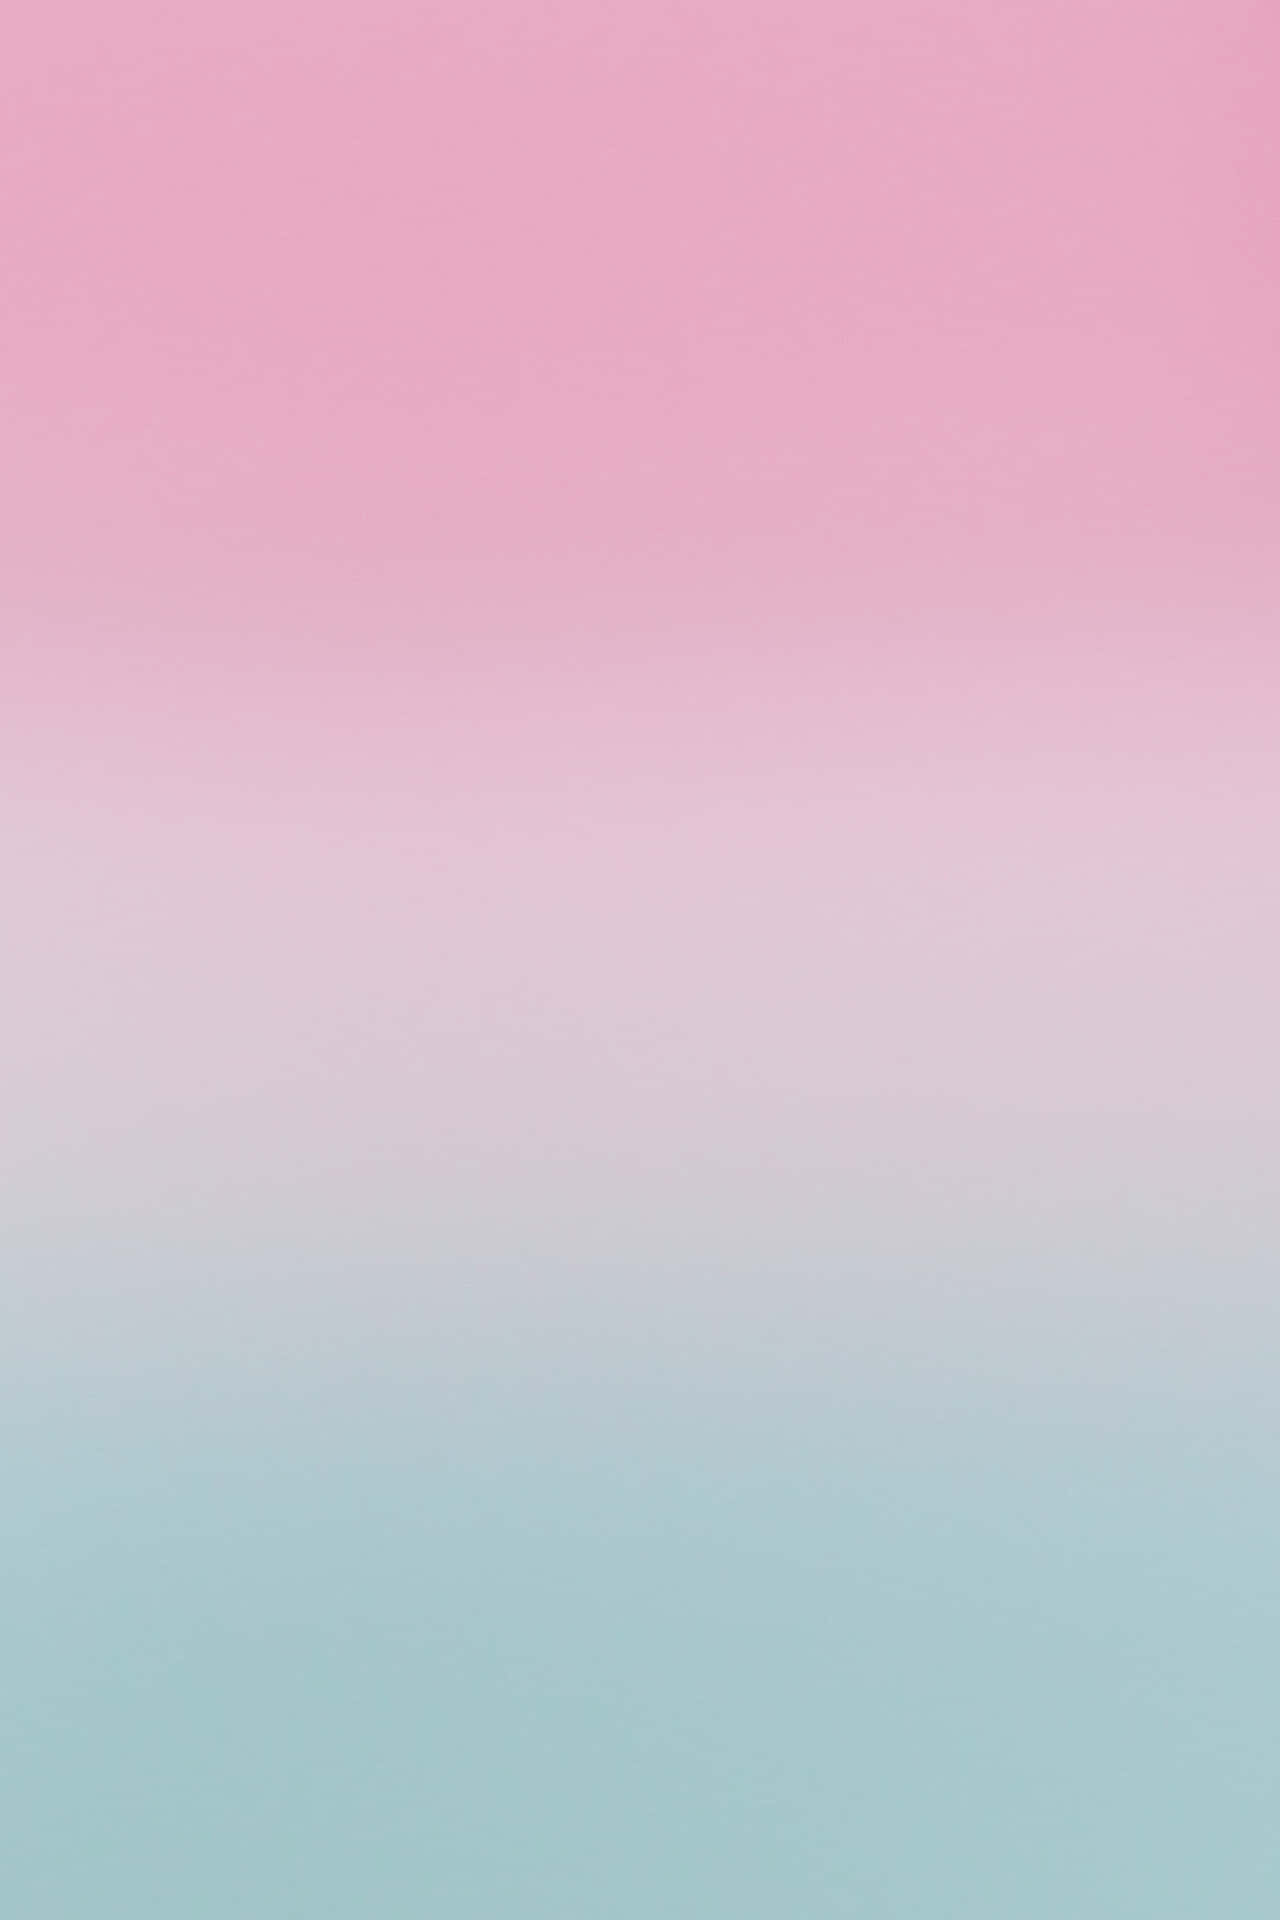 A Pink And Blue Gradient Background With A Blue Sky Wallpaper